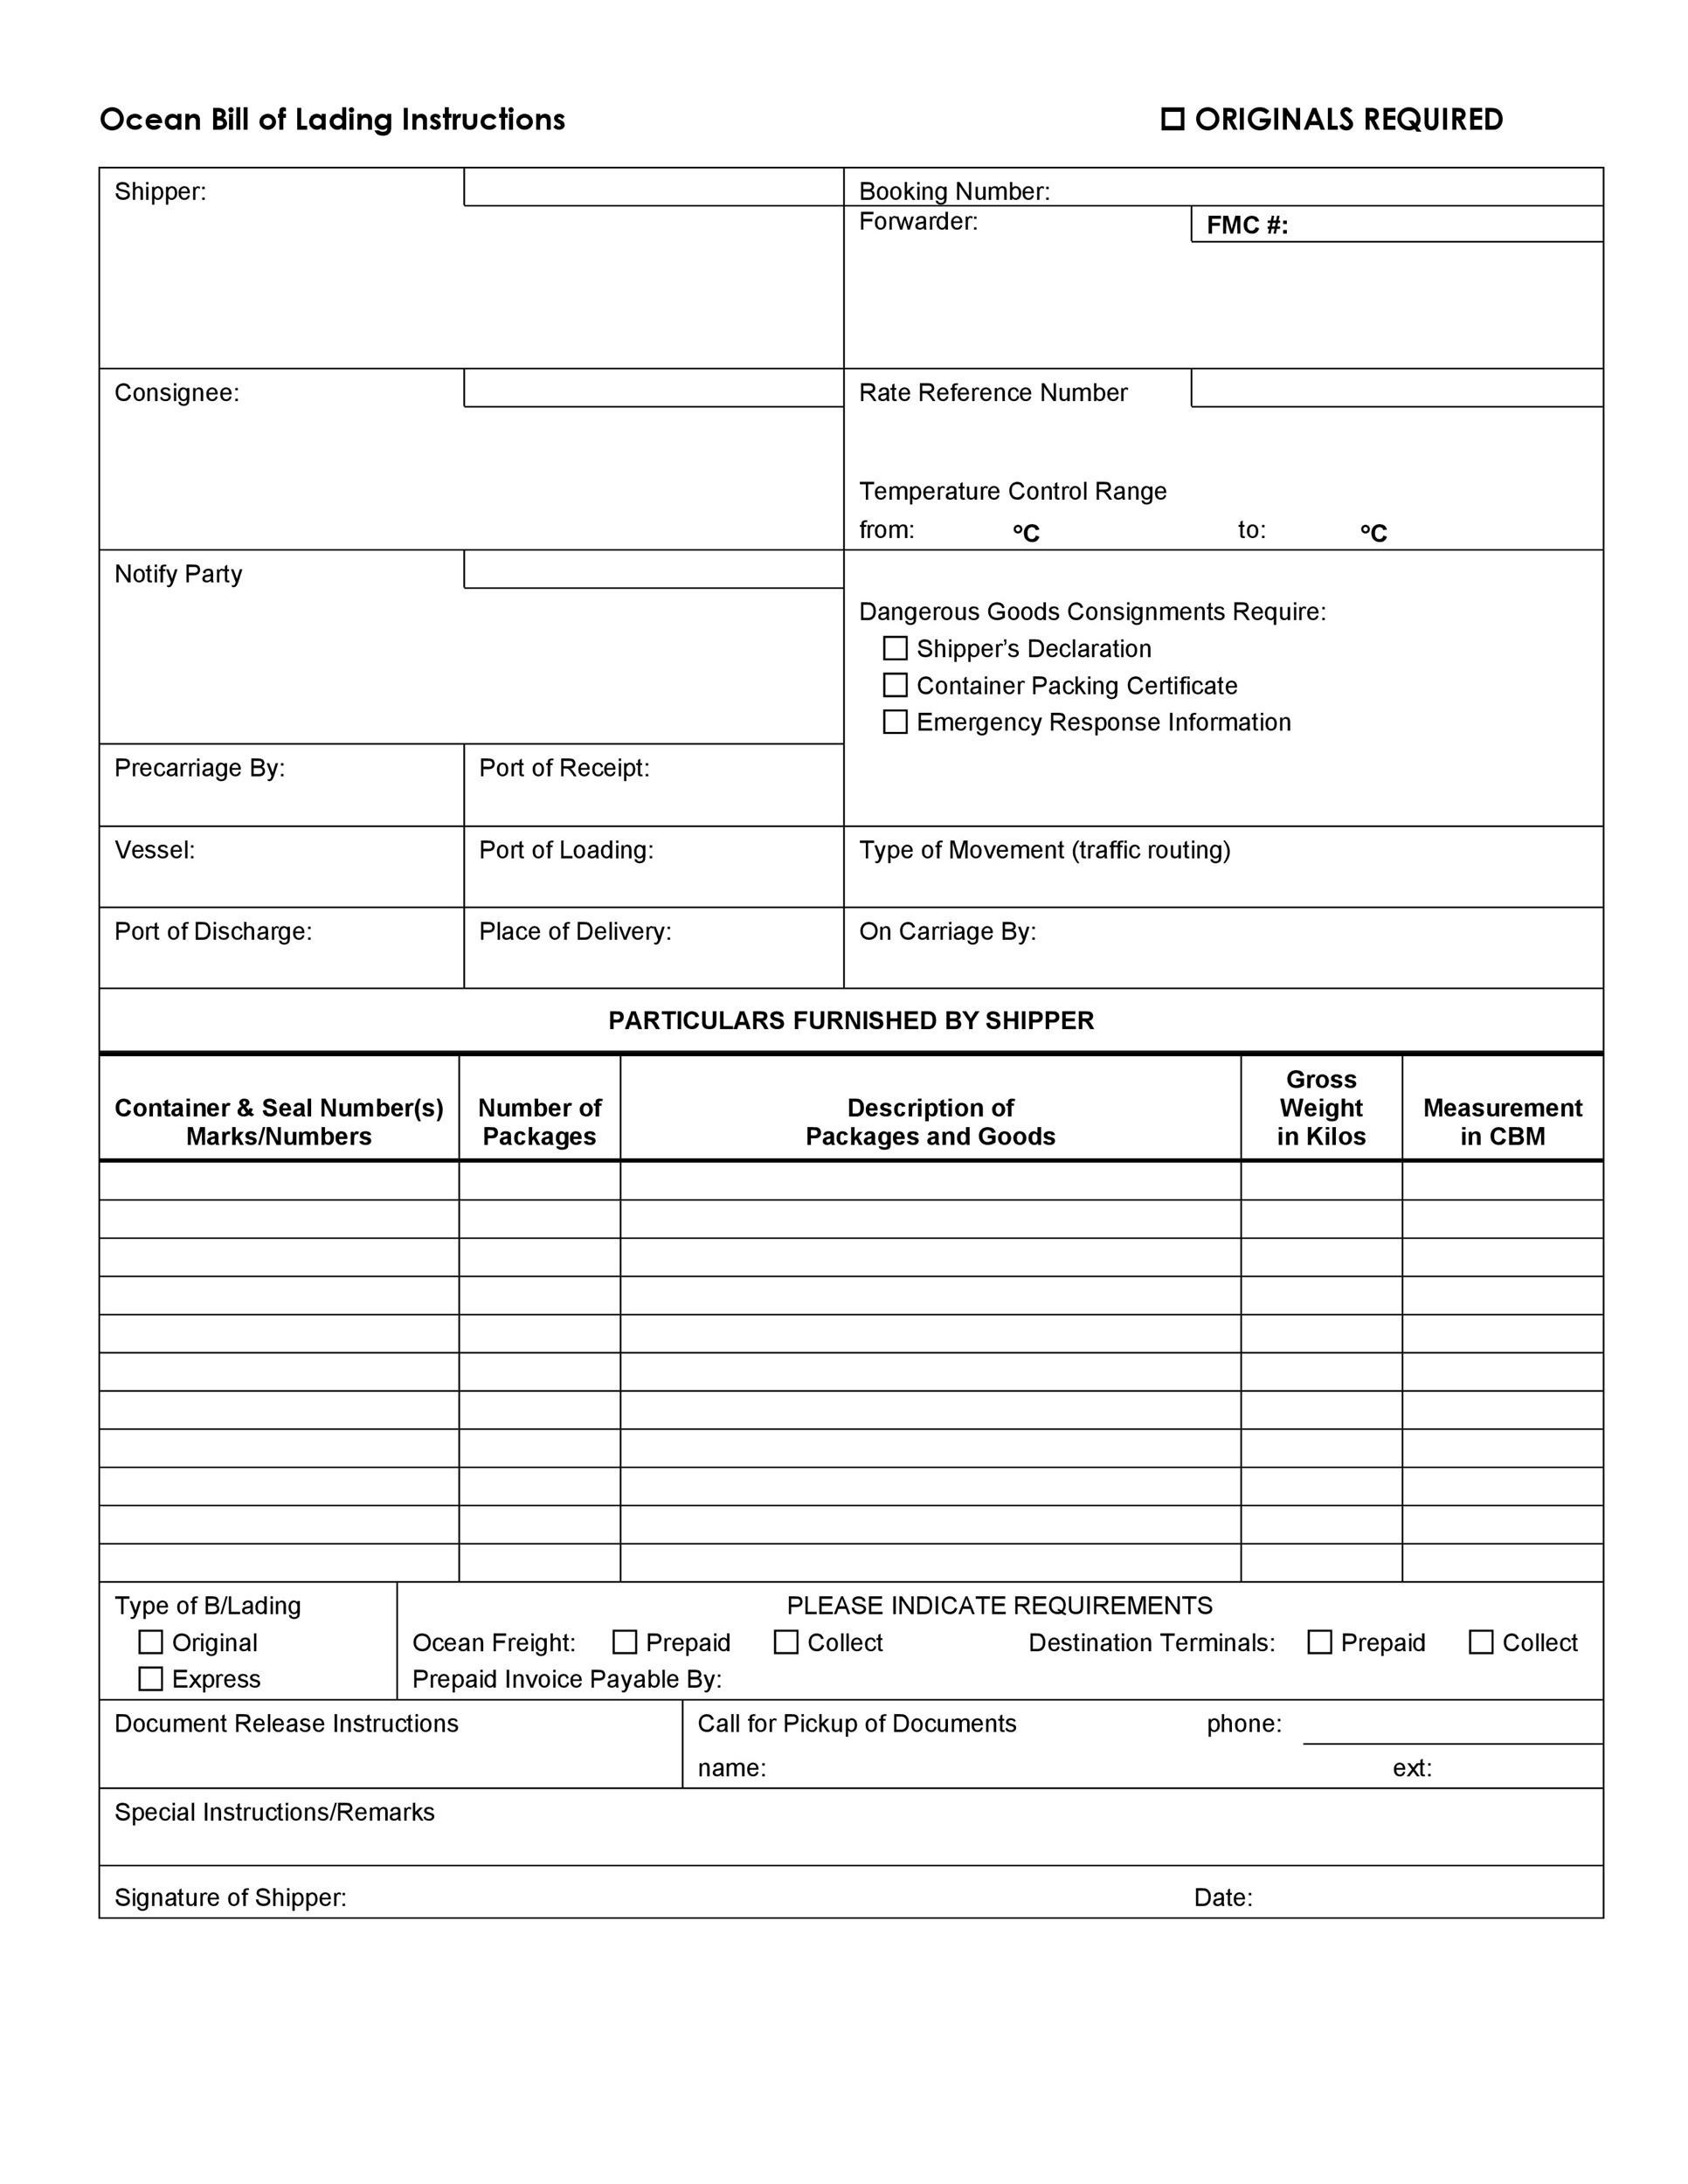 40 Free Bill of Lading Forms & Templates ᐅ TemplateLab